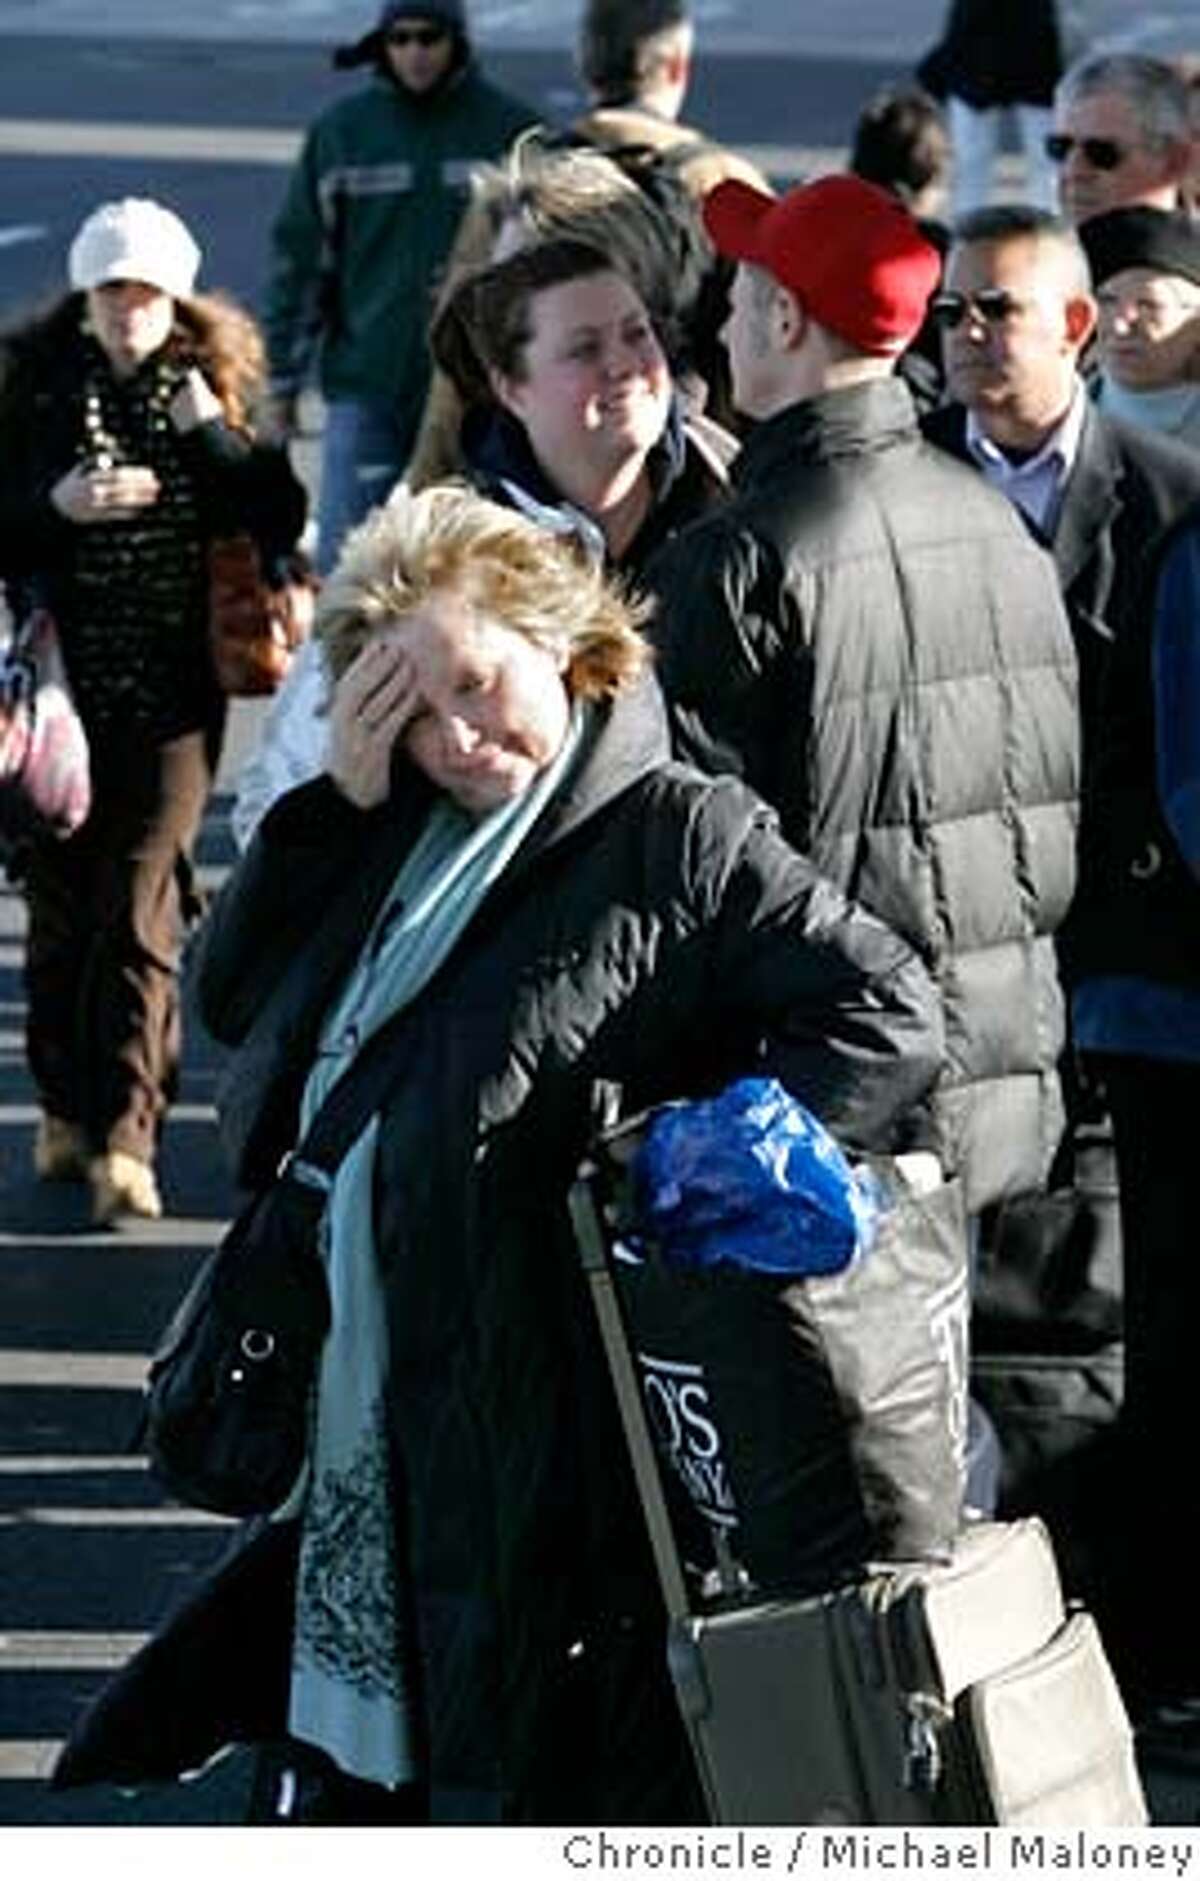 A frustrated Esther Benton of Los Angeles, waits in line for the rental car bus. Dozens of flights out of Oakland International Airport were delayed Friday afternoon after a man bolted past law enforcement and into the secure area of the airport, causing authorities to evacuate one terminal for two hours and the entire facility for about an hour, officials said. By 1 p.m., the airport was reopened and flights were beginning to take off again leaving huge lines as passengers needed to be re-screened. Photo taken on 1/5/07 by Michael Maloney / San Francisco Chronicle